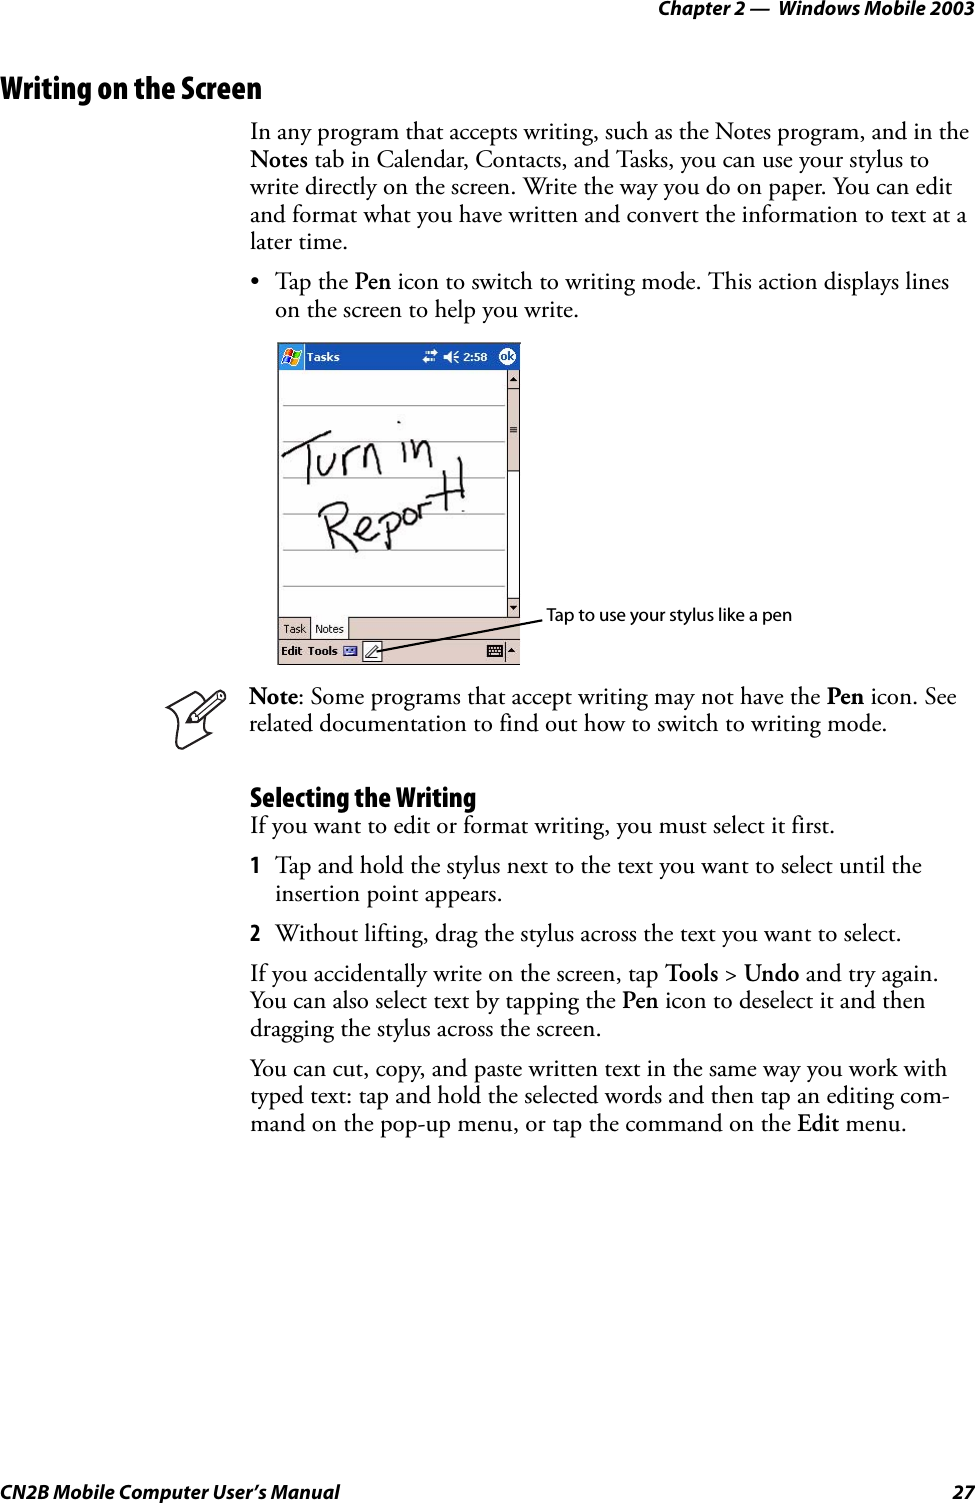 Chapter 2 —  Windows Mobile 2003CN2B Mobile Computer User’s Manual 27Writing on the ScreenIn any program that accepts writing, such as the Notes program, and in the Notes tab in Calendar, Contacts, and Tasks, you can use your stylus to write directly on the screen. Write the way you do on paper. You can edit and format what you have written and convert the information to text at a later time.•Tap the Pen icon to switch to writing mode. This action displays lines on the screen to help you write.Selecting the WritingIf you want to edit or format writing, you must select it first.1Tap and hold the stylus next to the text you want to select until the insertion point appears.2Without lifting, drag the stylus across the text you want to select.If you accidentally write on the screen, tap To o l s  &gt; Undo and try again. You can also select text by tapping the Pen icon to deselect it and then dragging the stylus across the screen.You can cut, copy, and paste written text in the same way you work with typed text: tap and hold the selected words and then tap an editing com-mand on the pop-up menu, or tap the command on the Edit menu.Note: Some programs that accept writing may not have the Pen icon. See related documentation to find out how to switch to writing mode.Tap to use your stylus like a pen